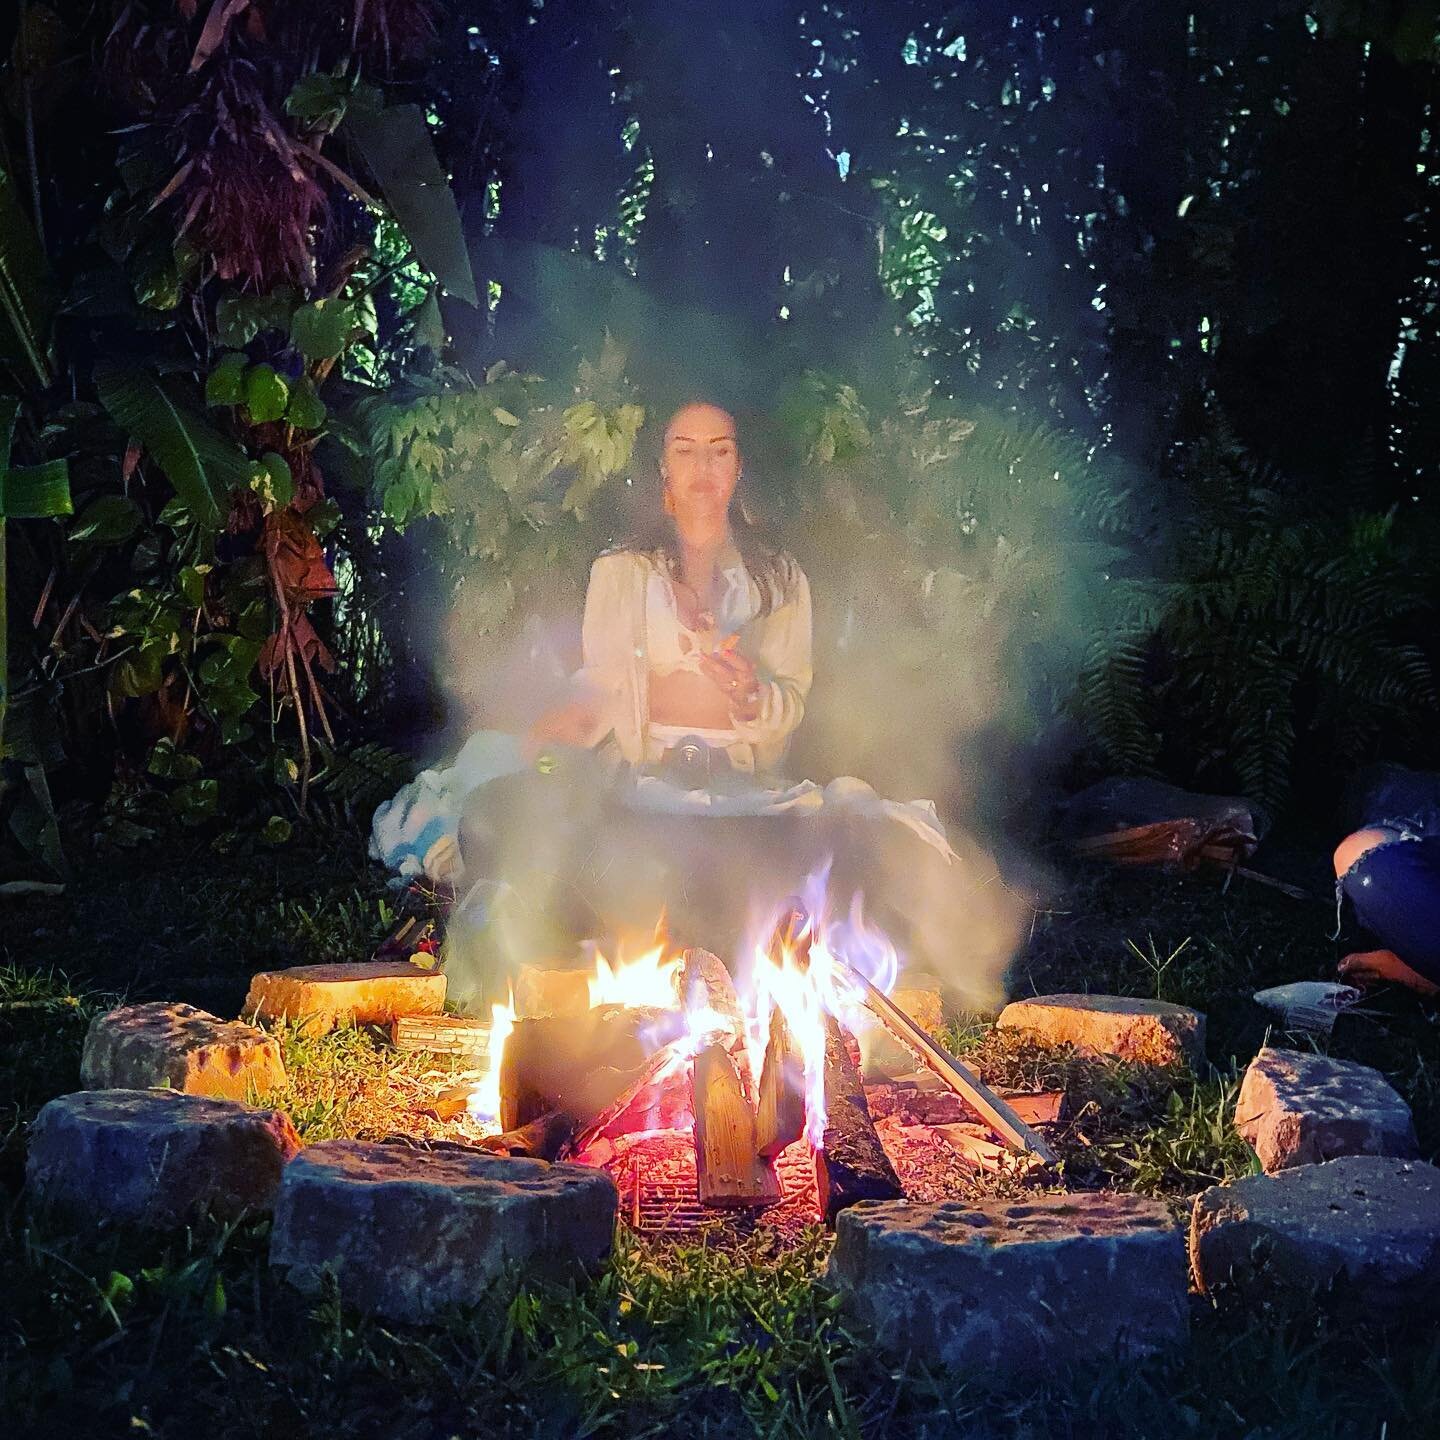 First magic circle at my house last night! So blessed to have🔥 as an energetic reset button.  It purifies by sending up in smoke all the negative energy associated with regrets, or destructive habits. #elementrituals #shamanichealing #divinefeminine